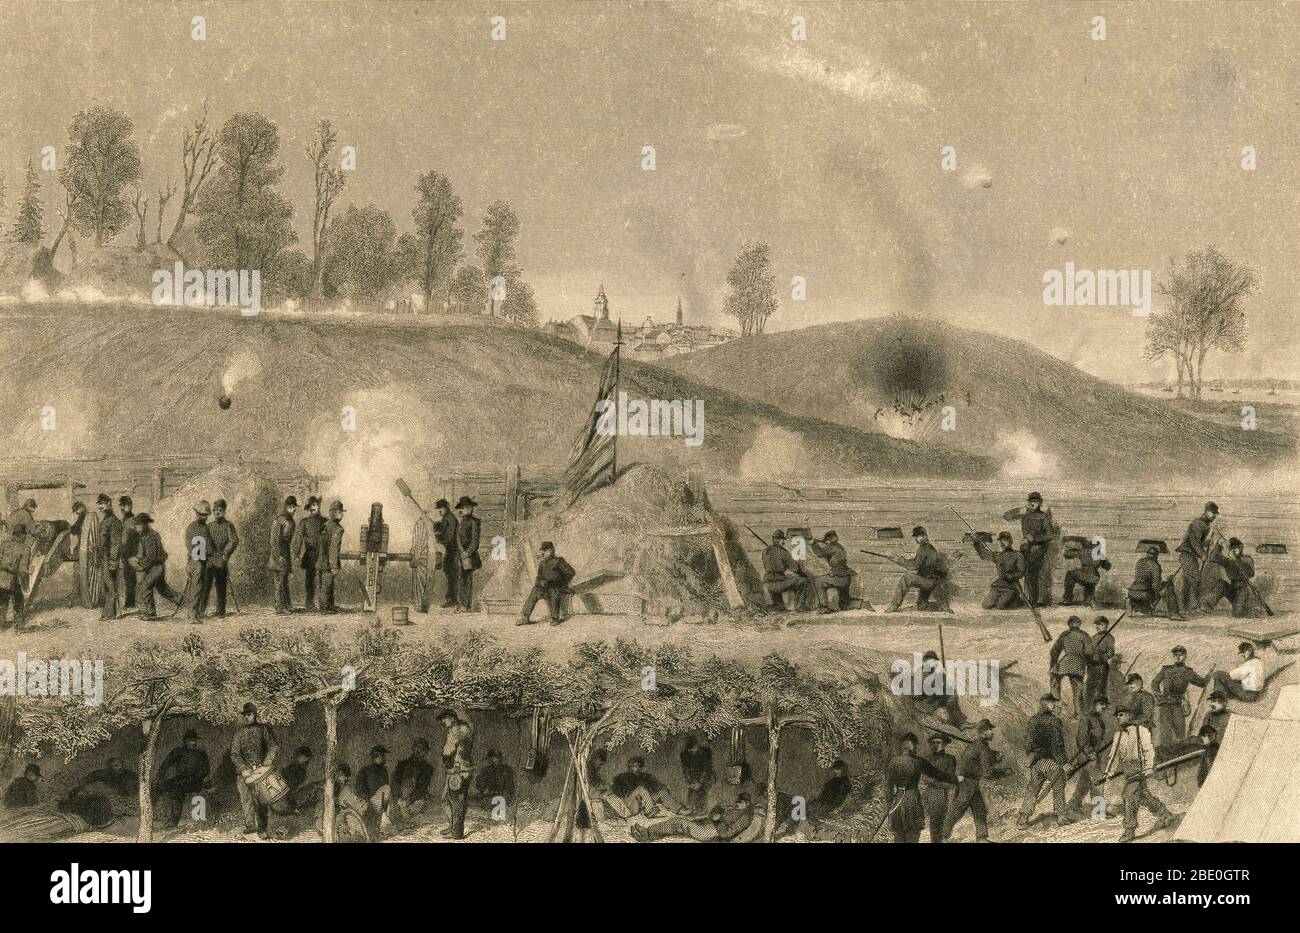 The Siege of Vicksburg in 1863 was the culmination of the Vicksburg Campaign and a key turning point of the American Civil War. The Confederates had control of the fortress city of Vicksburg, making it a barrier of the Mississippi River for the Union. Union Maj. Gen. Ulysses S. Grant took control of the Mississippi River by launching an assault on the Confederate army of Lt. Gen. John C. Pemberton at Vicksburg. After more than a month of attacks, the Confederates surrendered, splitting the Confederacy in half. Stock Photo